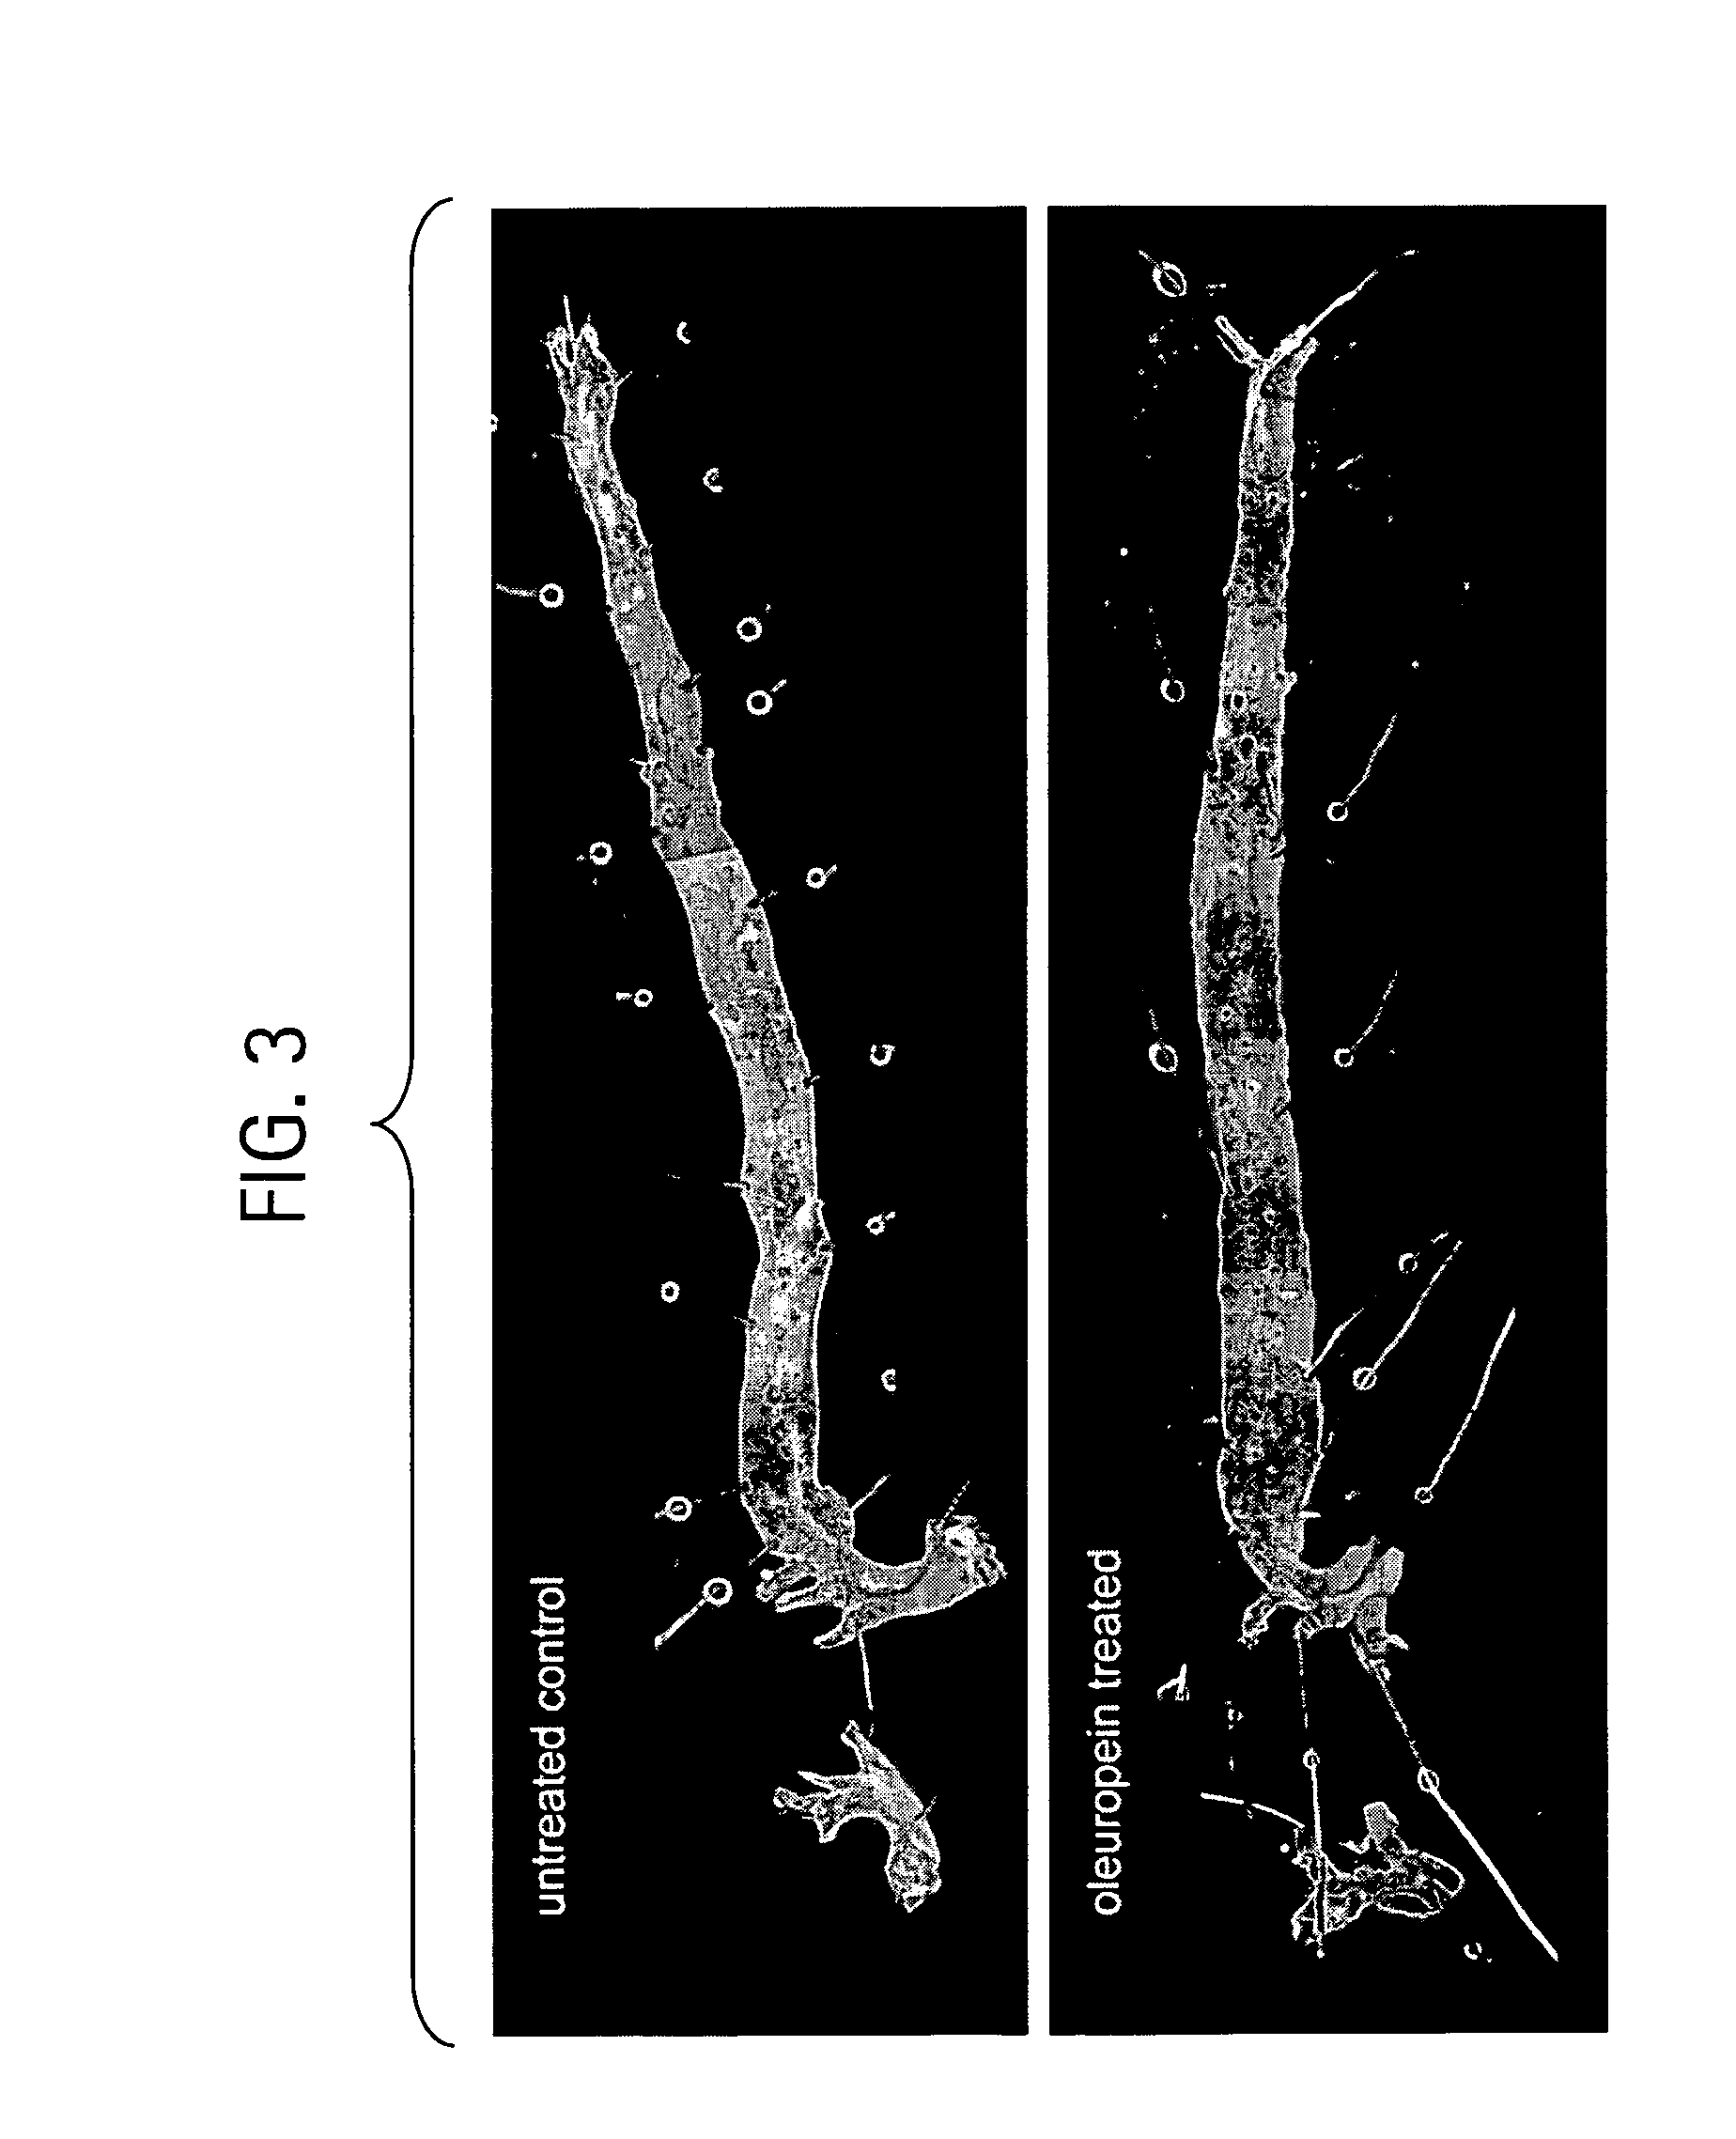 Compositions and methods for treating obesity, obesity related disorders and for inhibiting the infectivity of human immunodeficiency virus